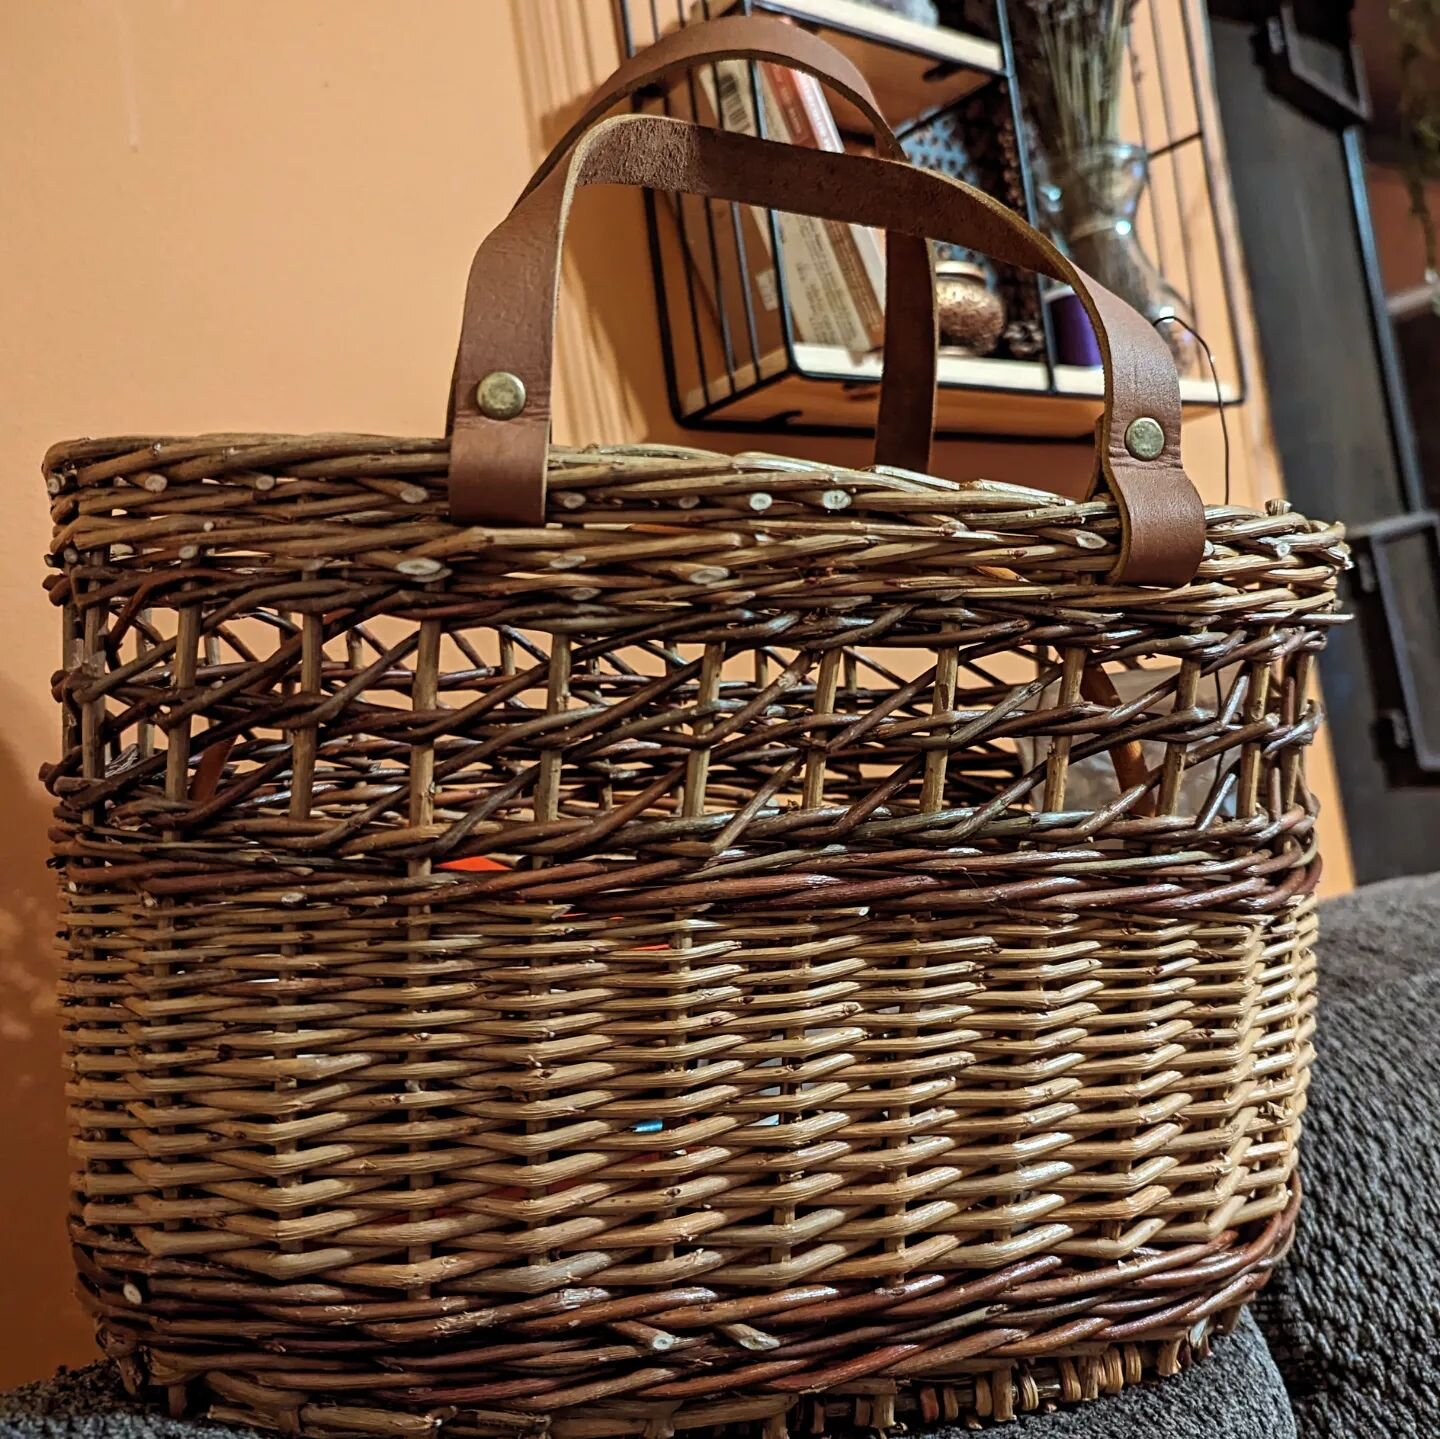 It is now properly done! 

I'm so excited to have found some leather and put two handles on the basket that I made at the scallom basket  workshop with Dawn Myers.  On the sunshine coast. 

After an evening of harvesting me now until the sun had full